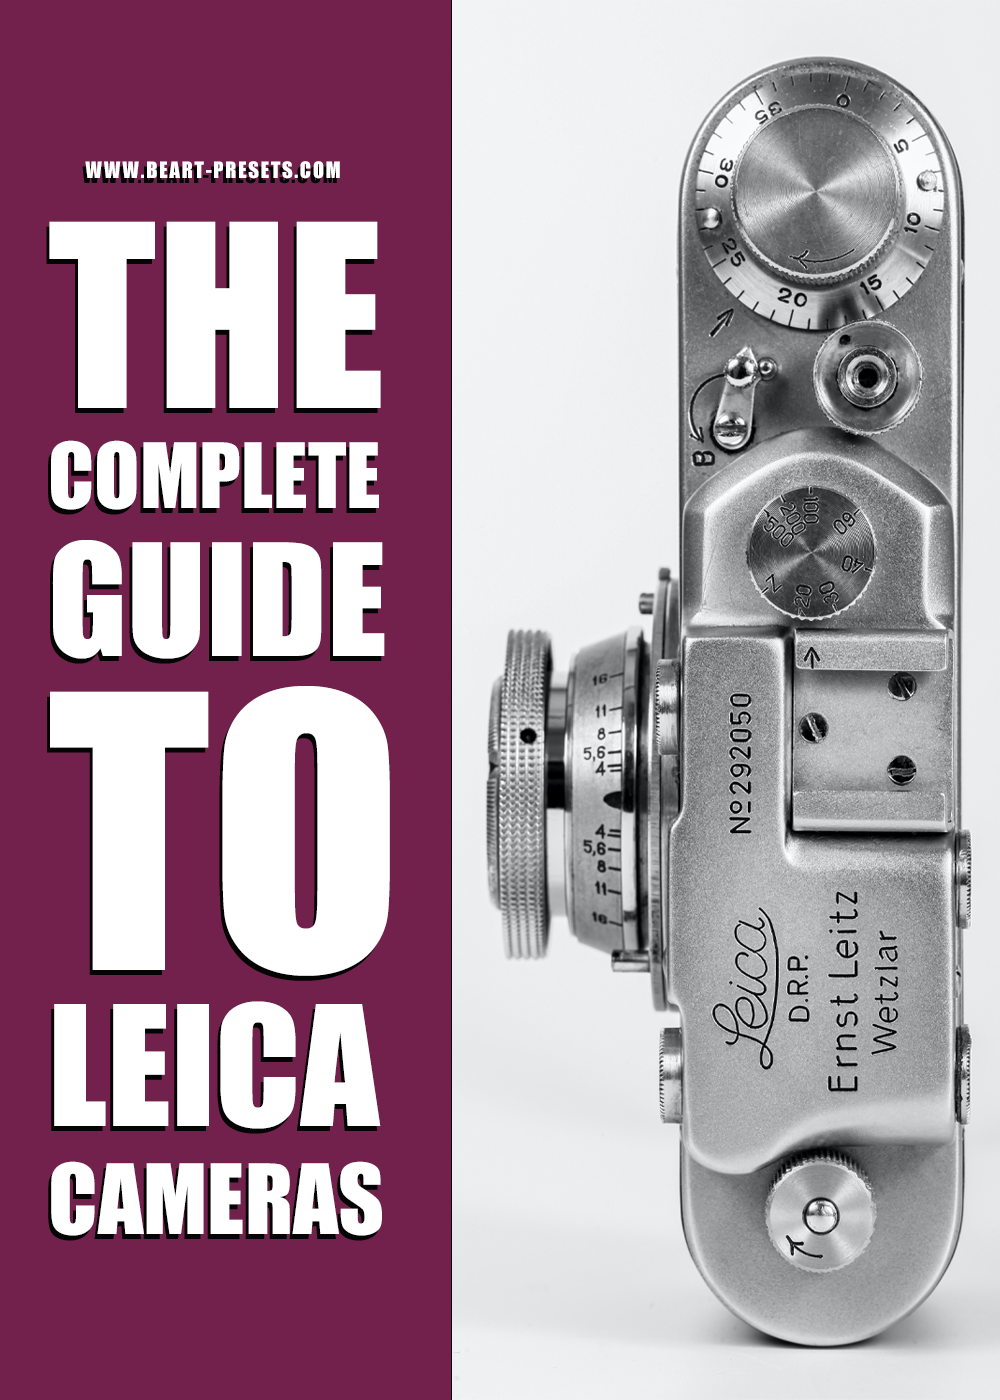 The Complete Guide To Leica Cameras